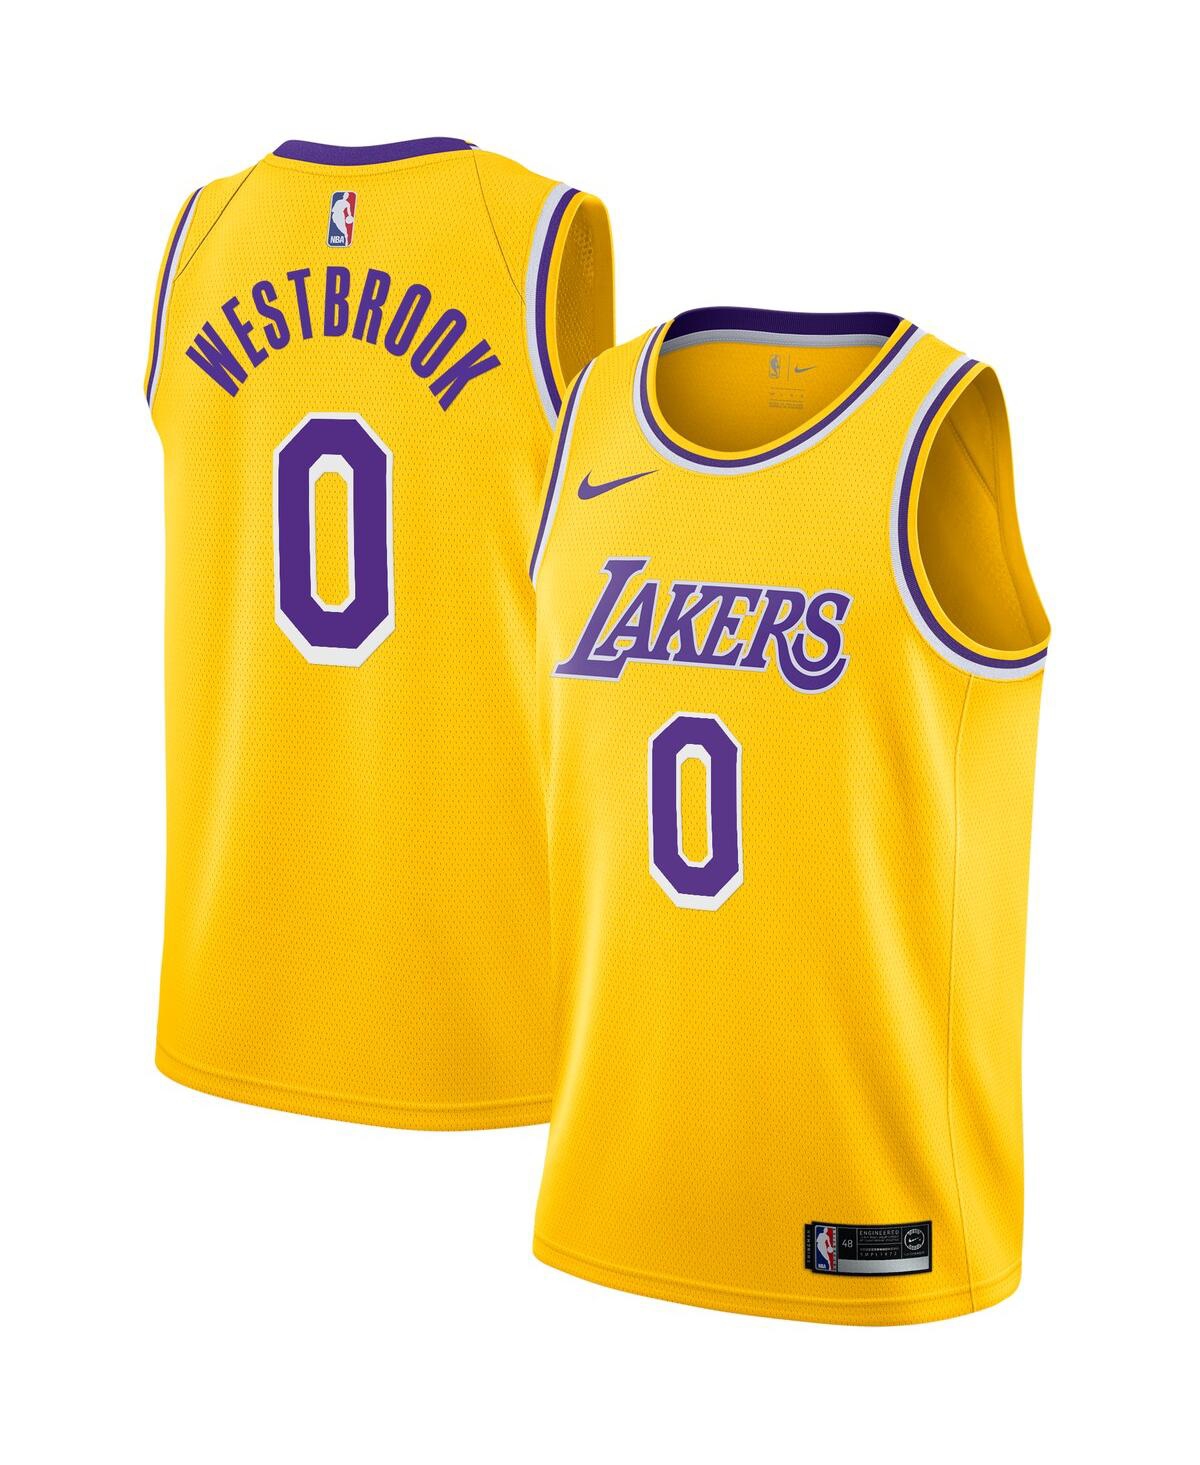 Men's Nike Russell Westbrook Gold Los Angeles Lakers 2020/21 Swingman Player Jersey - Icon Edition - Gold